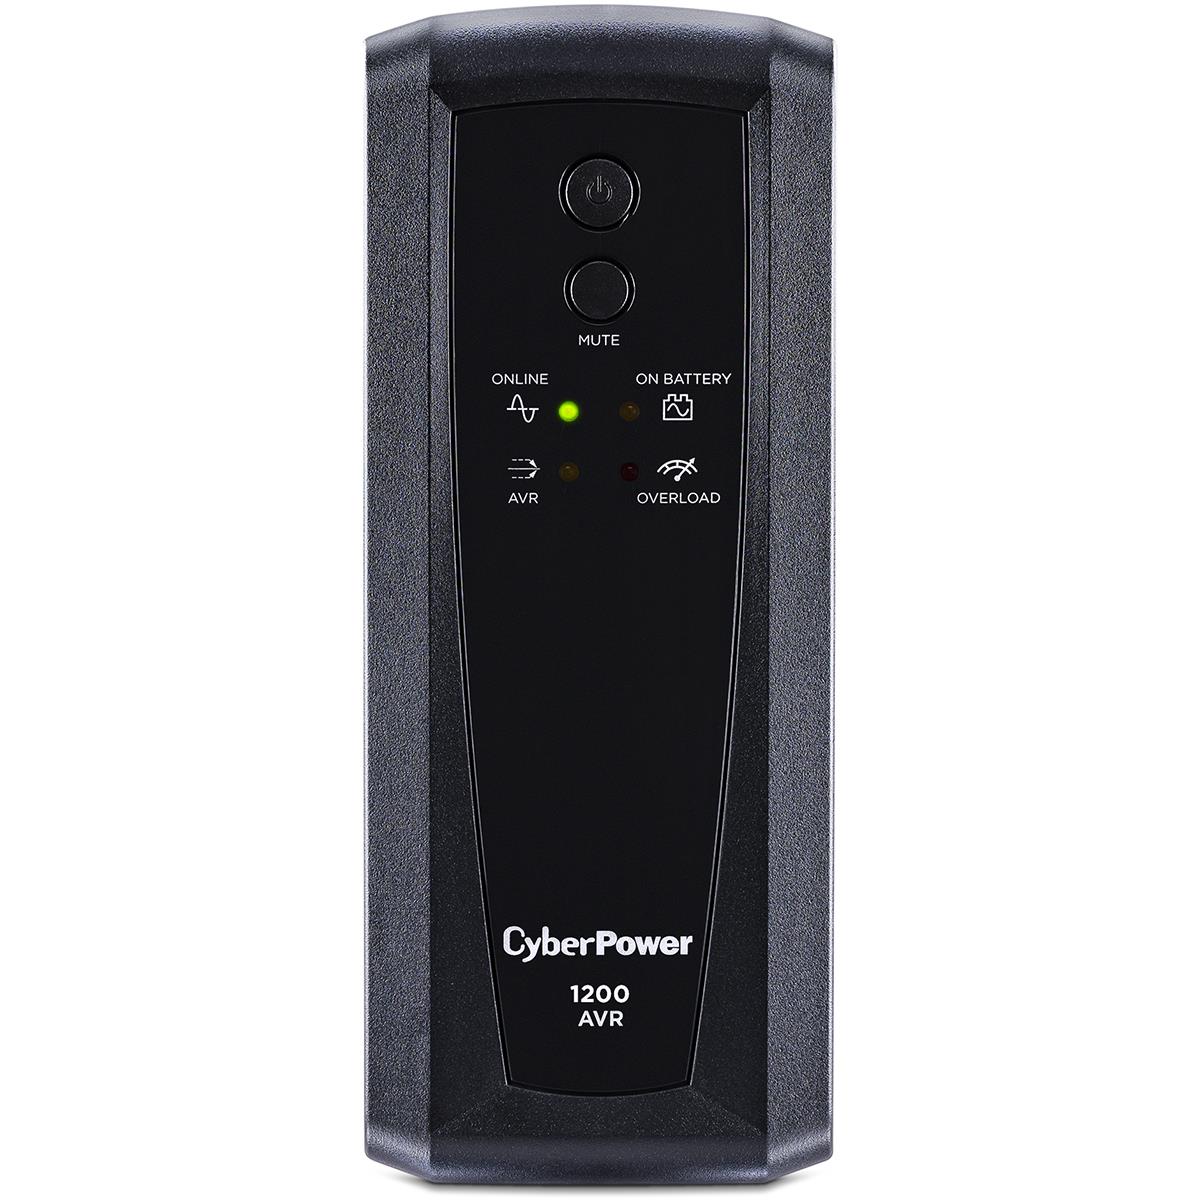 

CyberPower AVR Series Computer Battery Backup, 1200VA 720W UPS, 8 Outlets